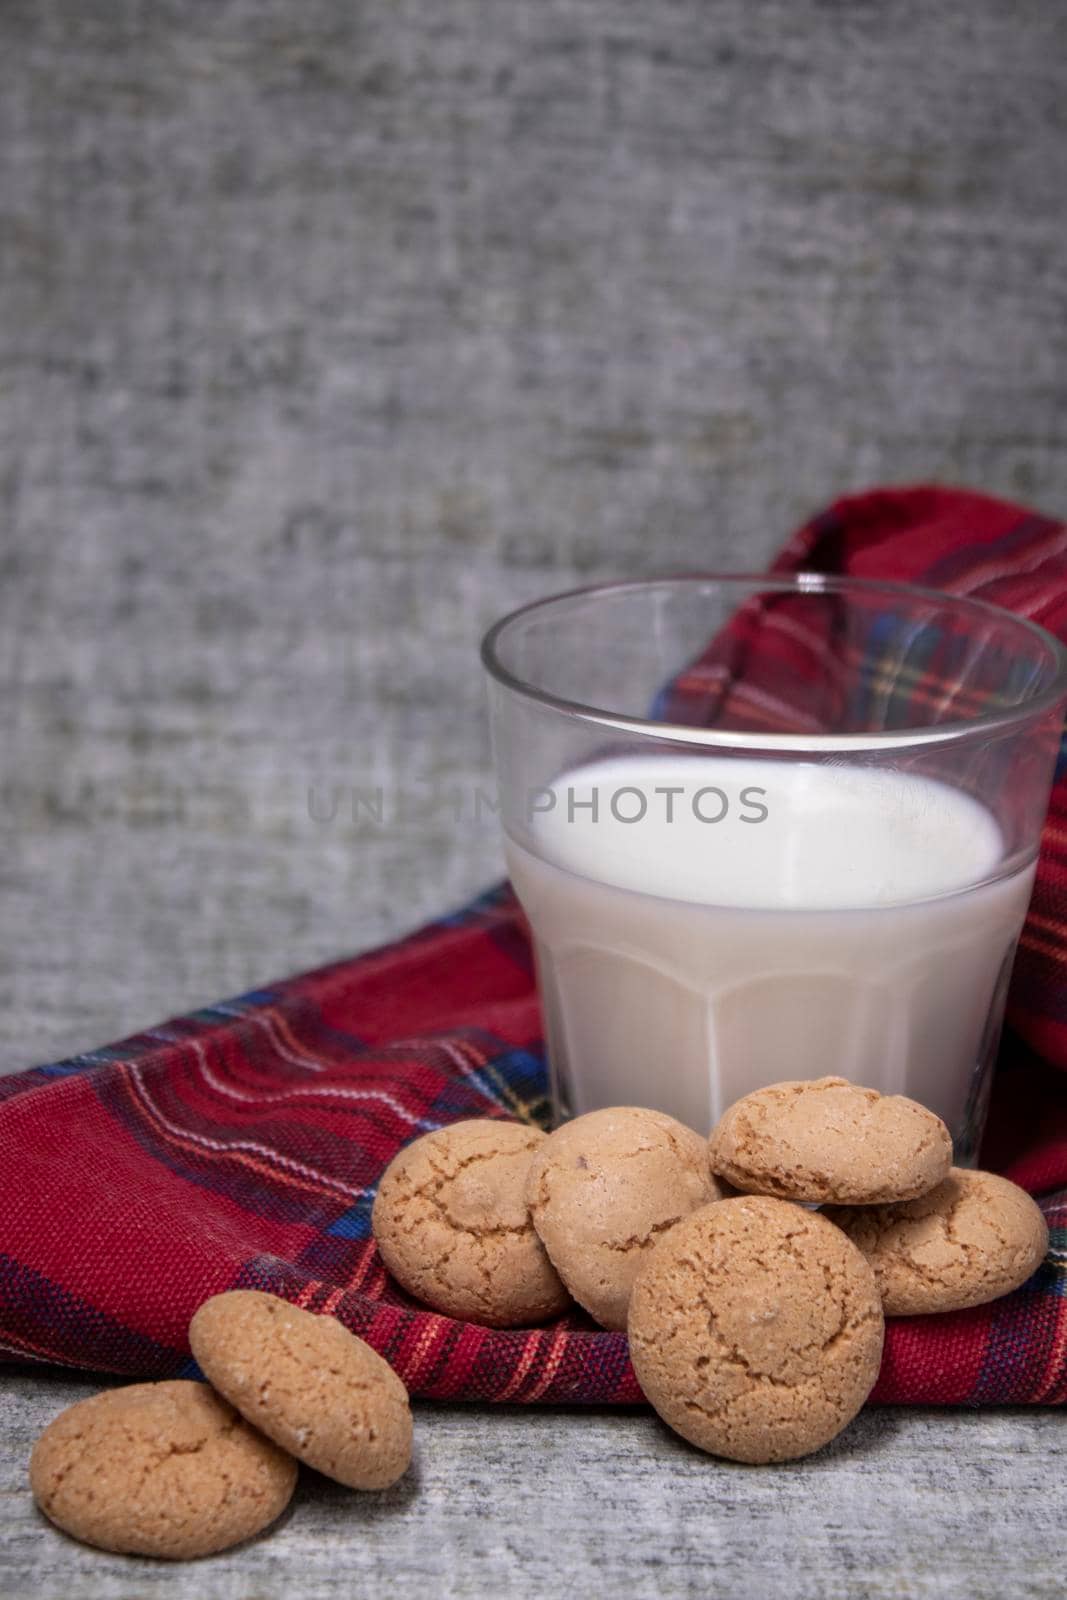 glass of milk near almond amaretti cookies on plaid red fabric tablecloth. healthy breakfast snack by oliavesna